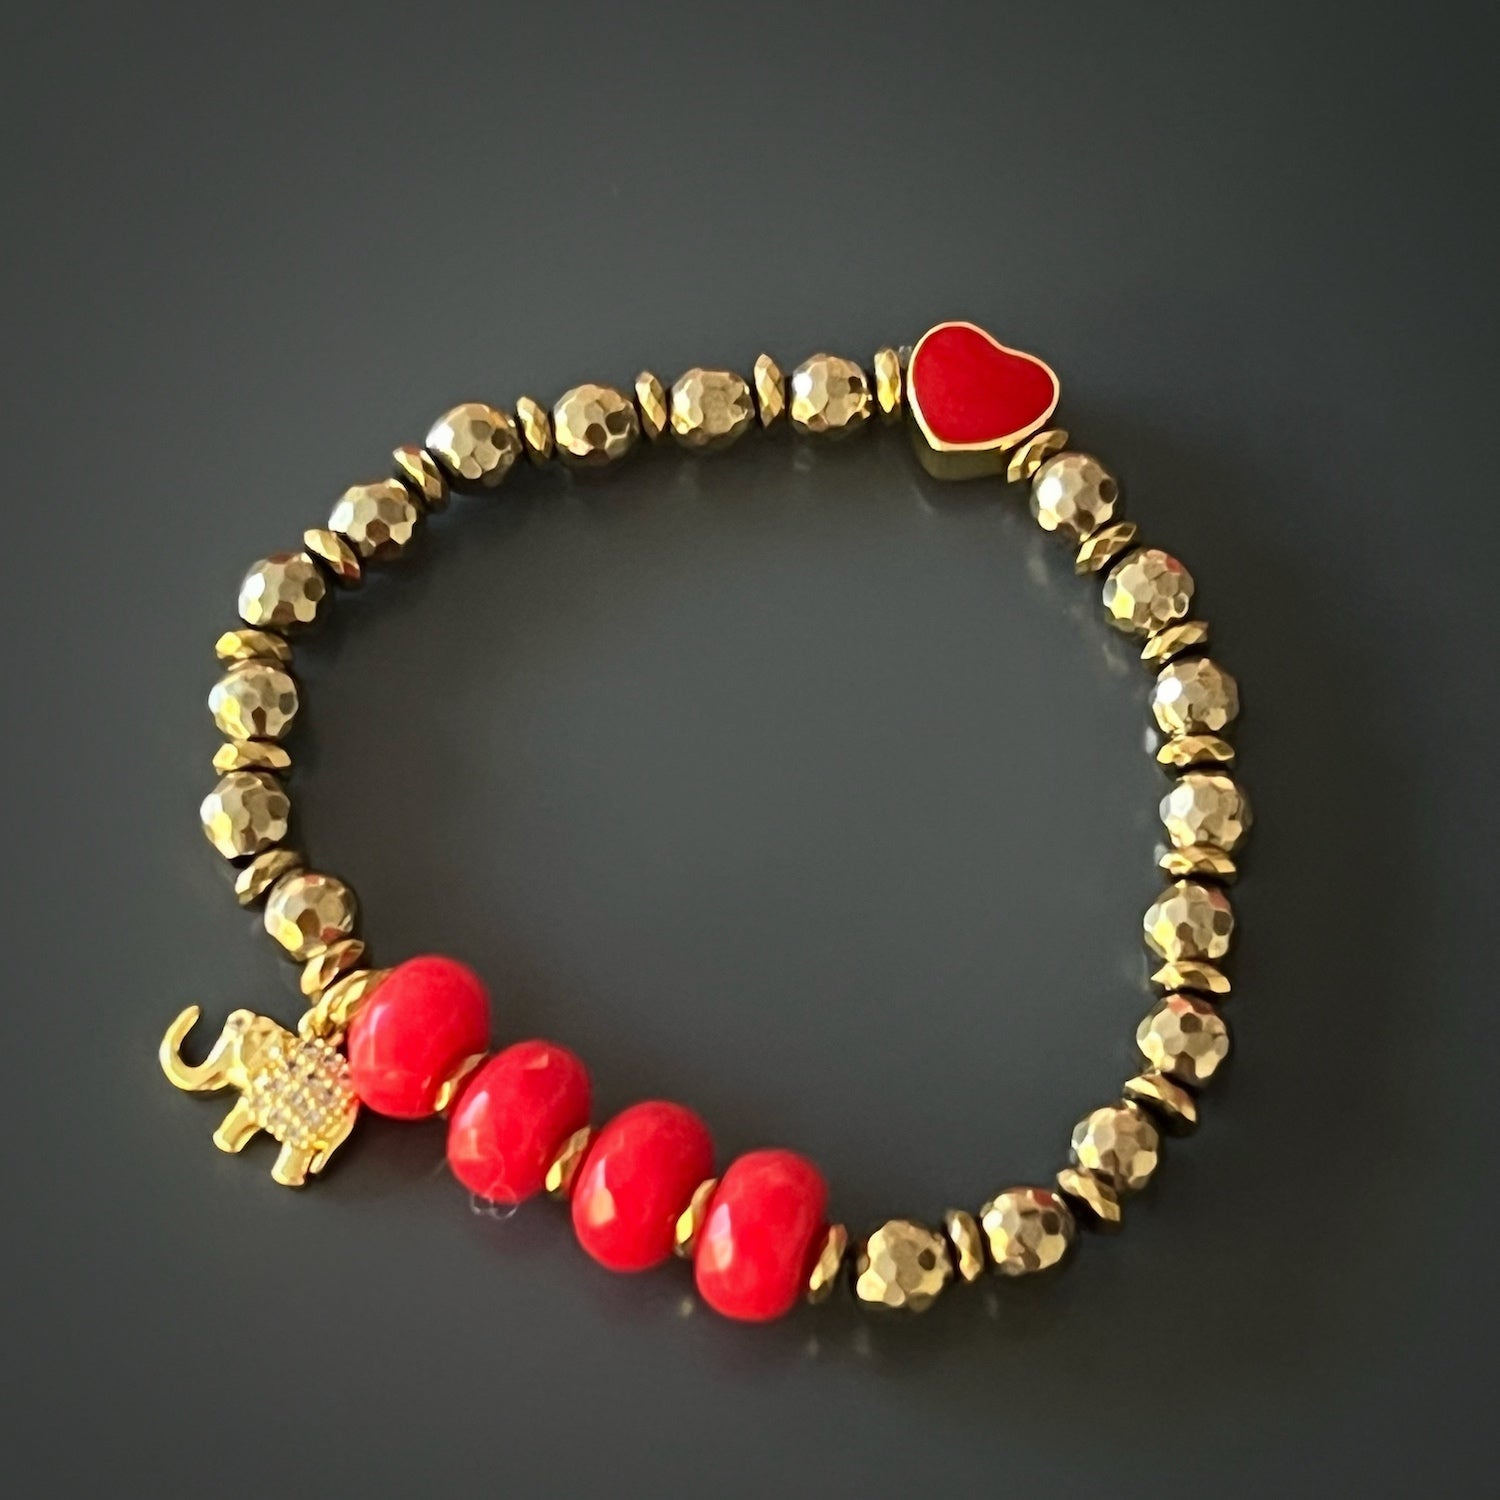 Celebrate the beauty and symbolism of the Red Heart Lucky Elephant Bracelet, a handcrafted piece that radiates style and good fortune.